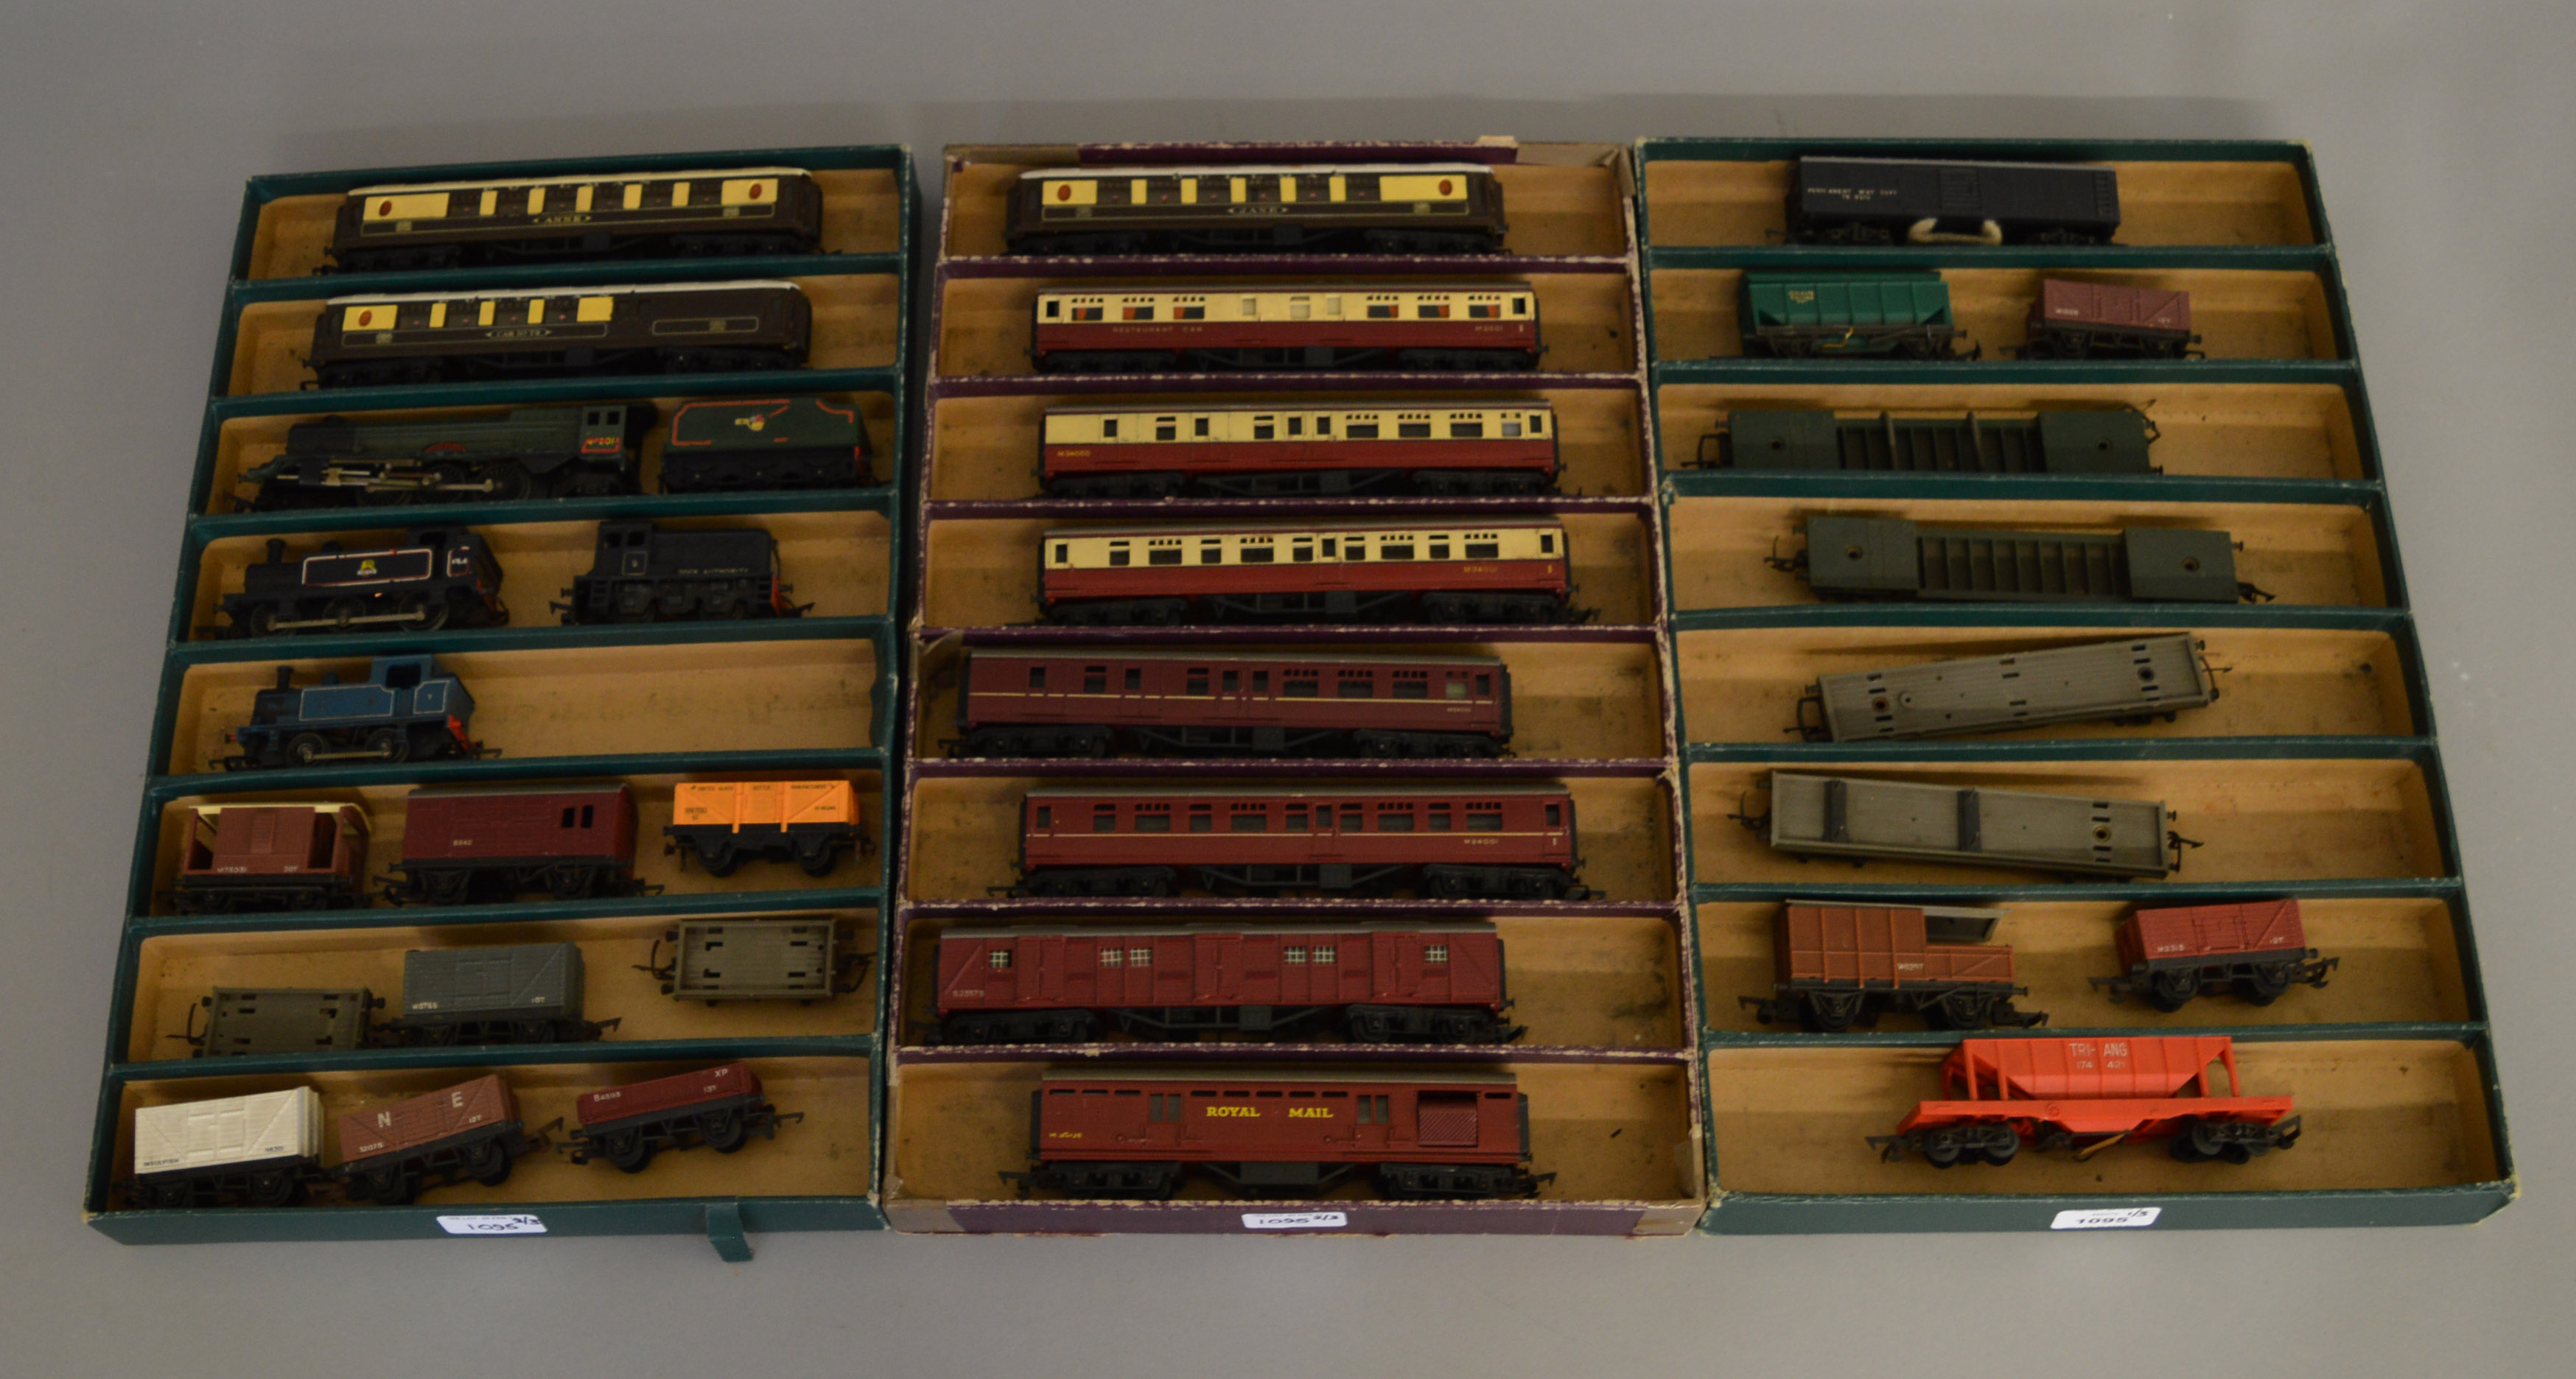 OO Gauge. 4 unboxed Locomotives, one with Tender, together with 29 pieces of Rolling Stock including